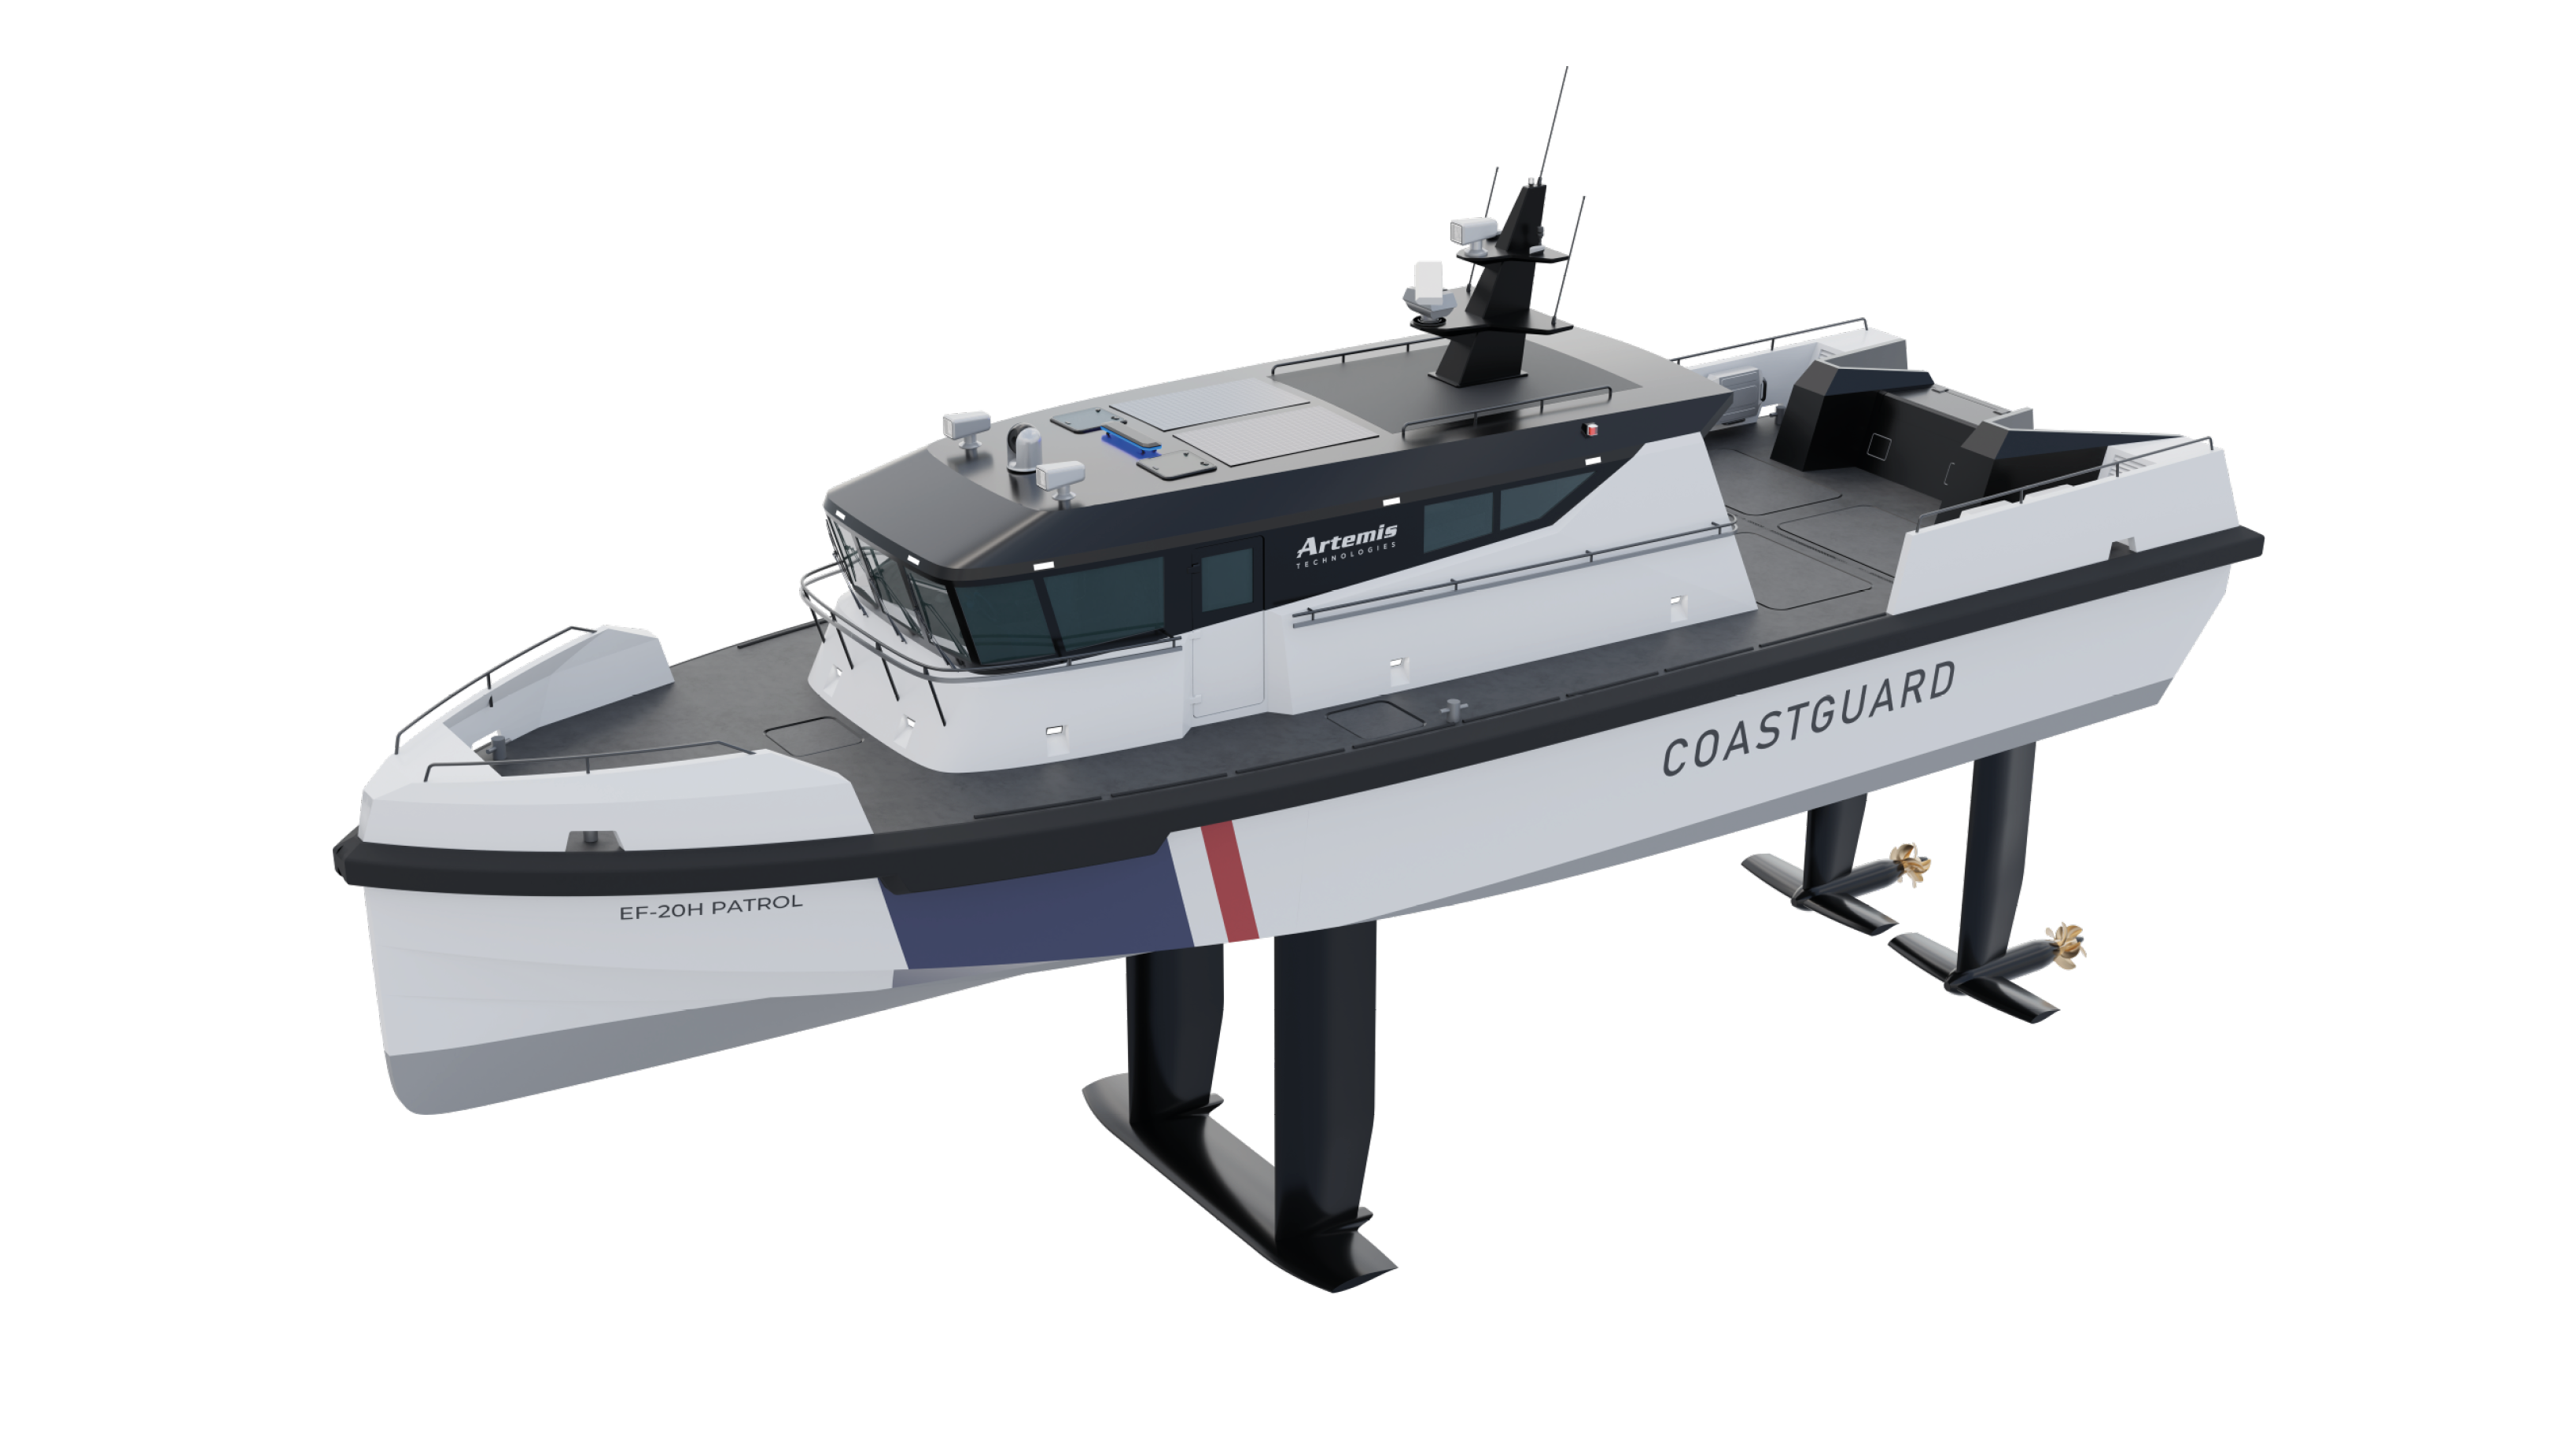 Front side view of the EF-20H patrol boat with foils visible